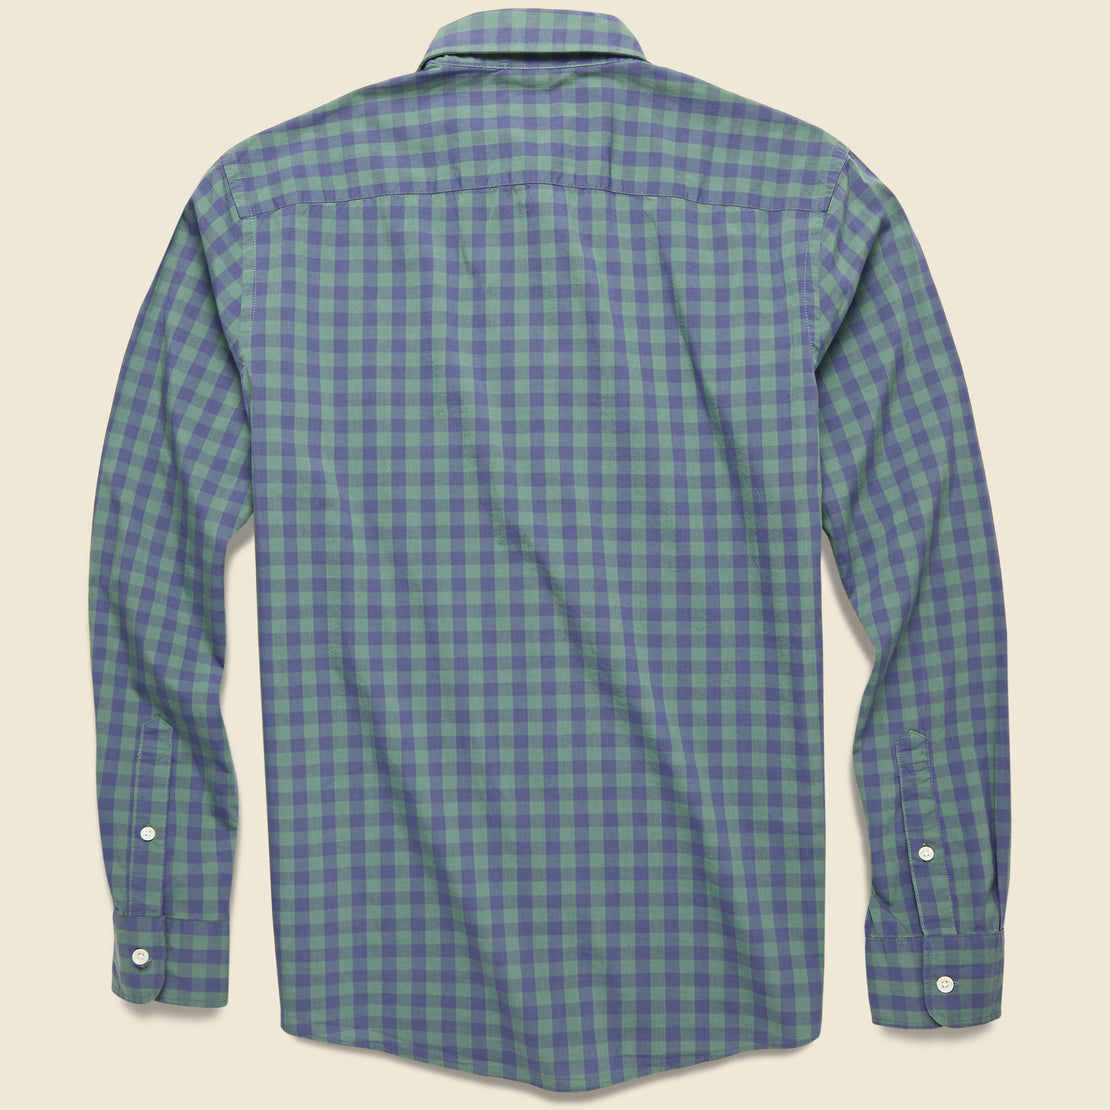 Movement Shirt - Forest Gingham - Faherty - STAG Provisions - Tops - L/S Woven - Plaid